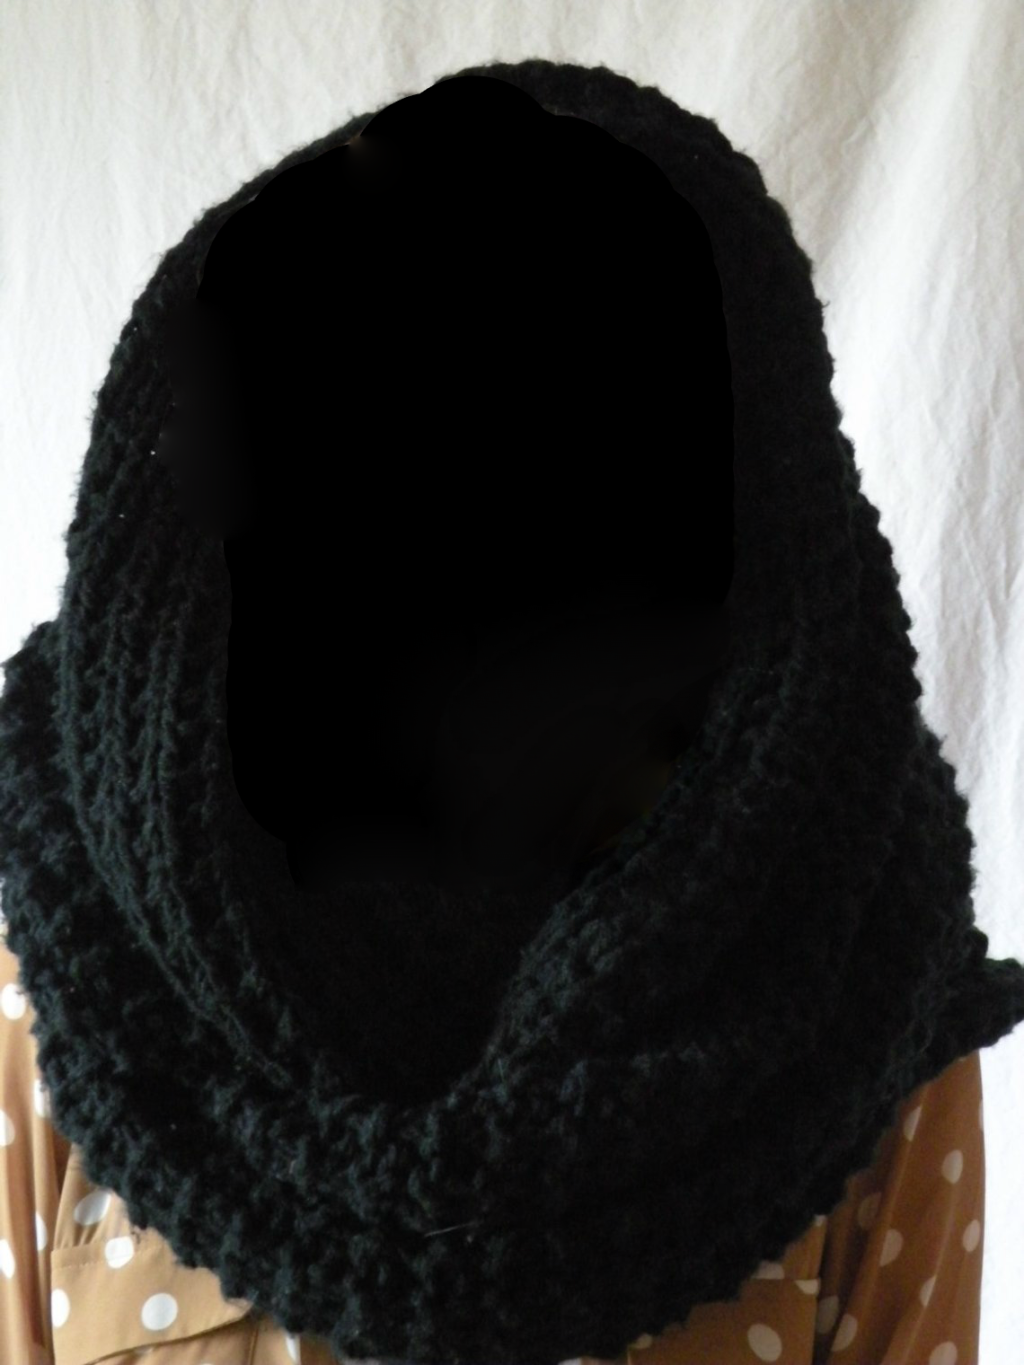 Search Continues For Woman Lost In Infinity Scarf